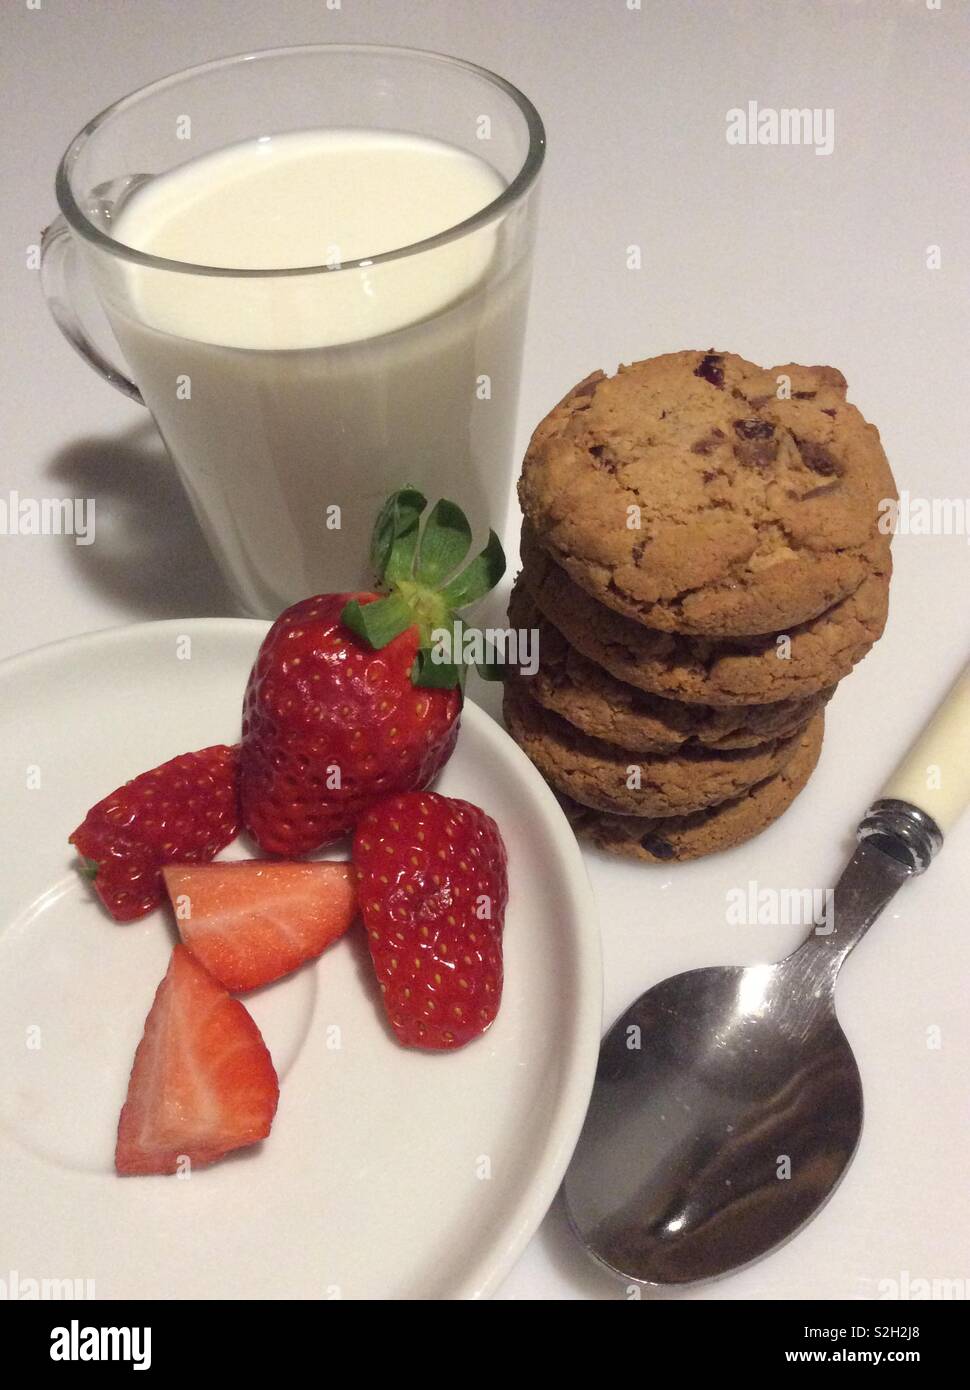 Breakfast with a glass of milk, fresh strawberries, homemade cranberry and chocolate cookies Stock Photo